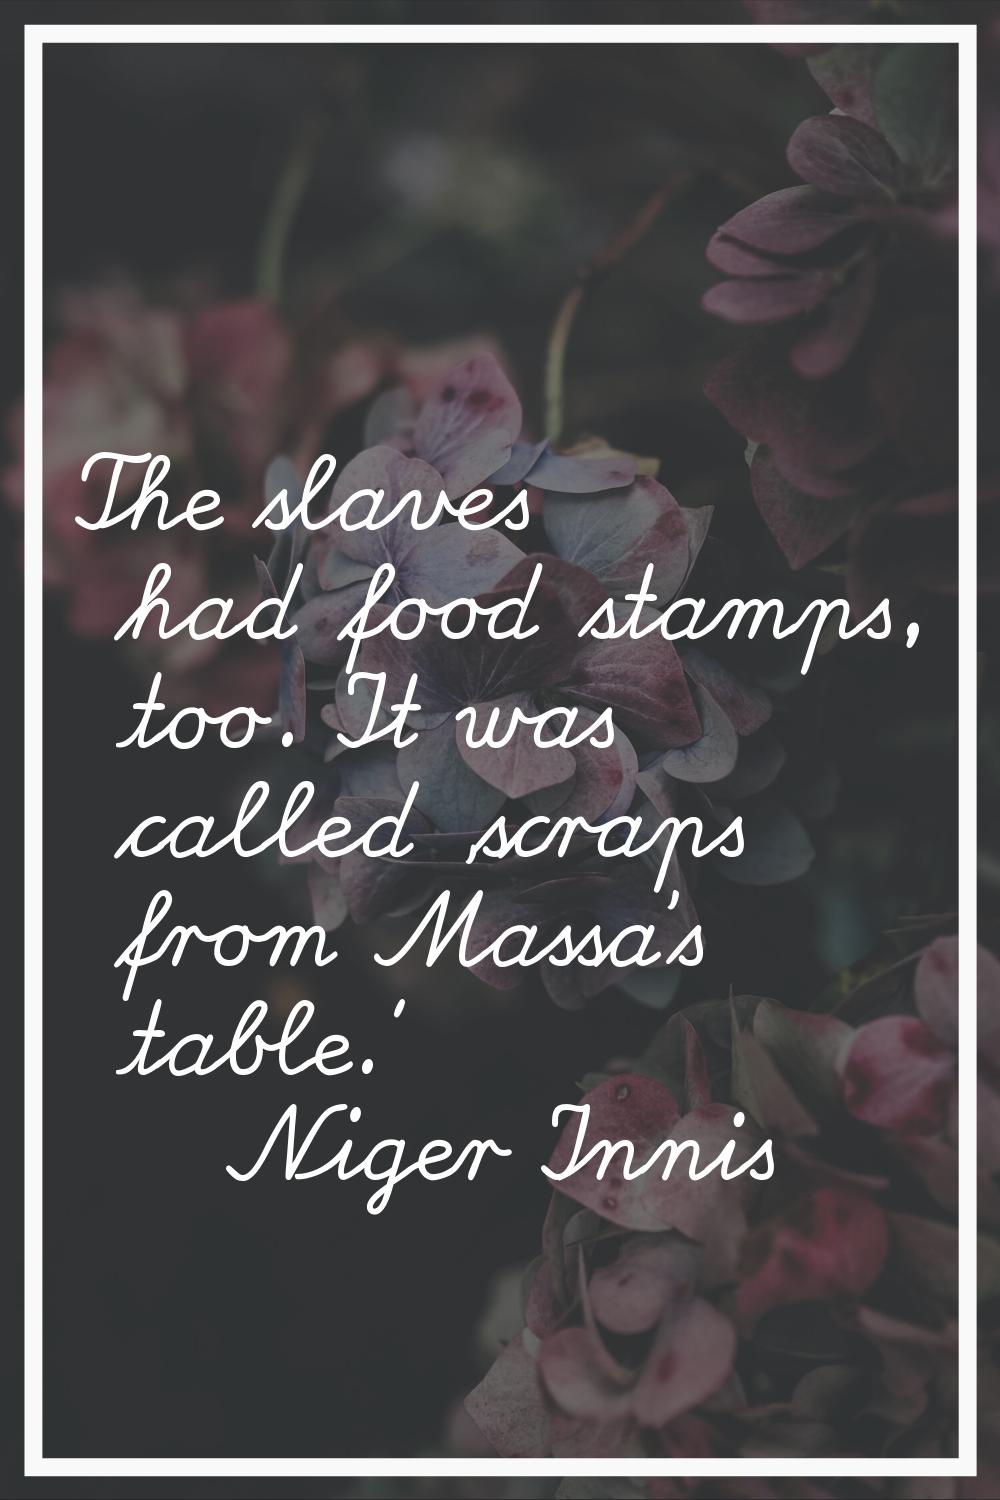 The slaves had food stamps, too. It was called 'scraps from Massa's table.'